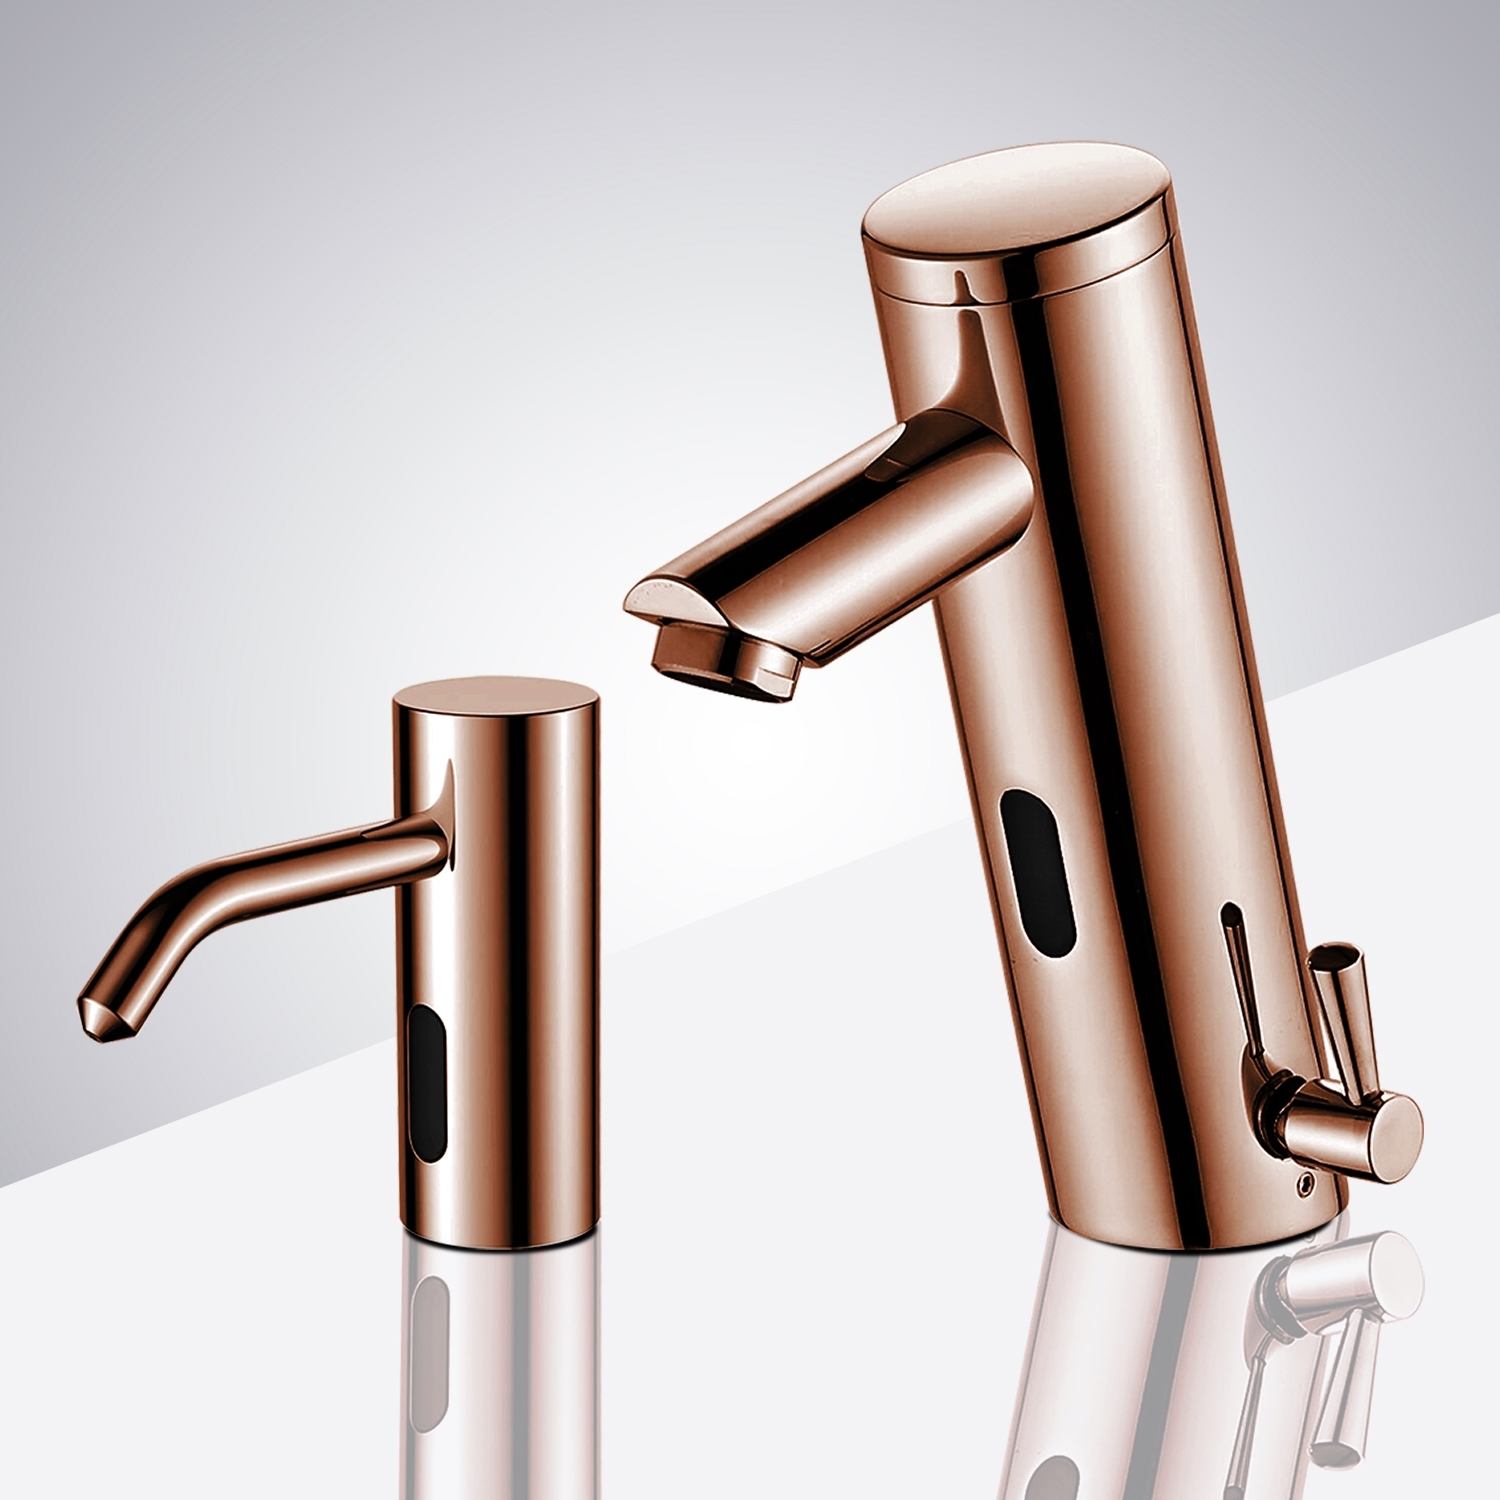 Fontana Platinum Rose Gold Commercial Automatic Temperature Control Thermostatic Sensor Tap with Matching Soap Dispenser